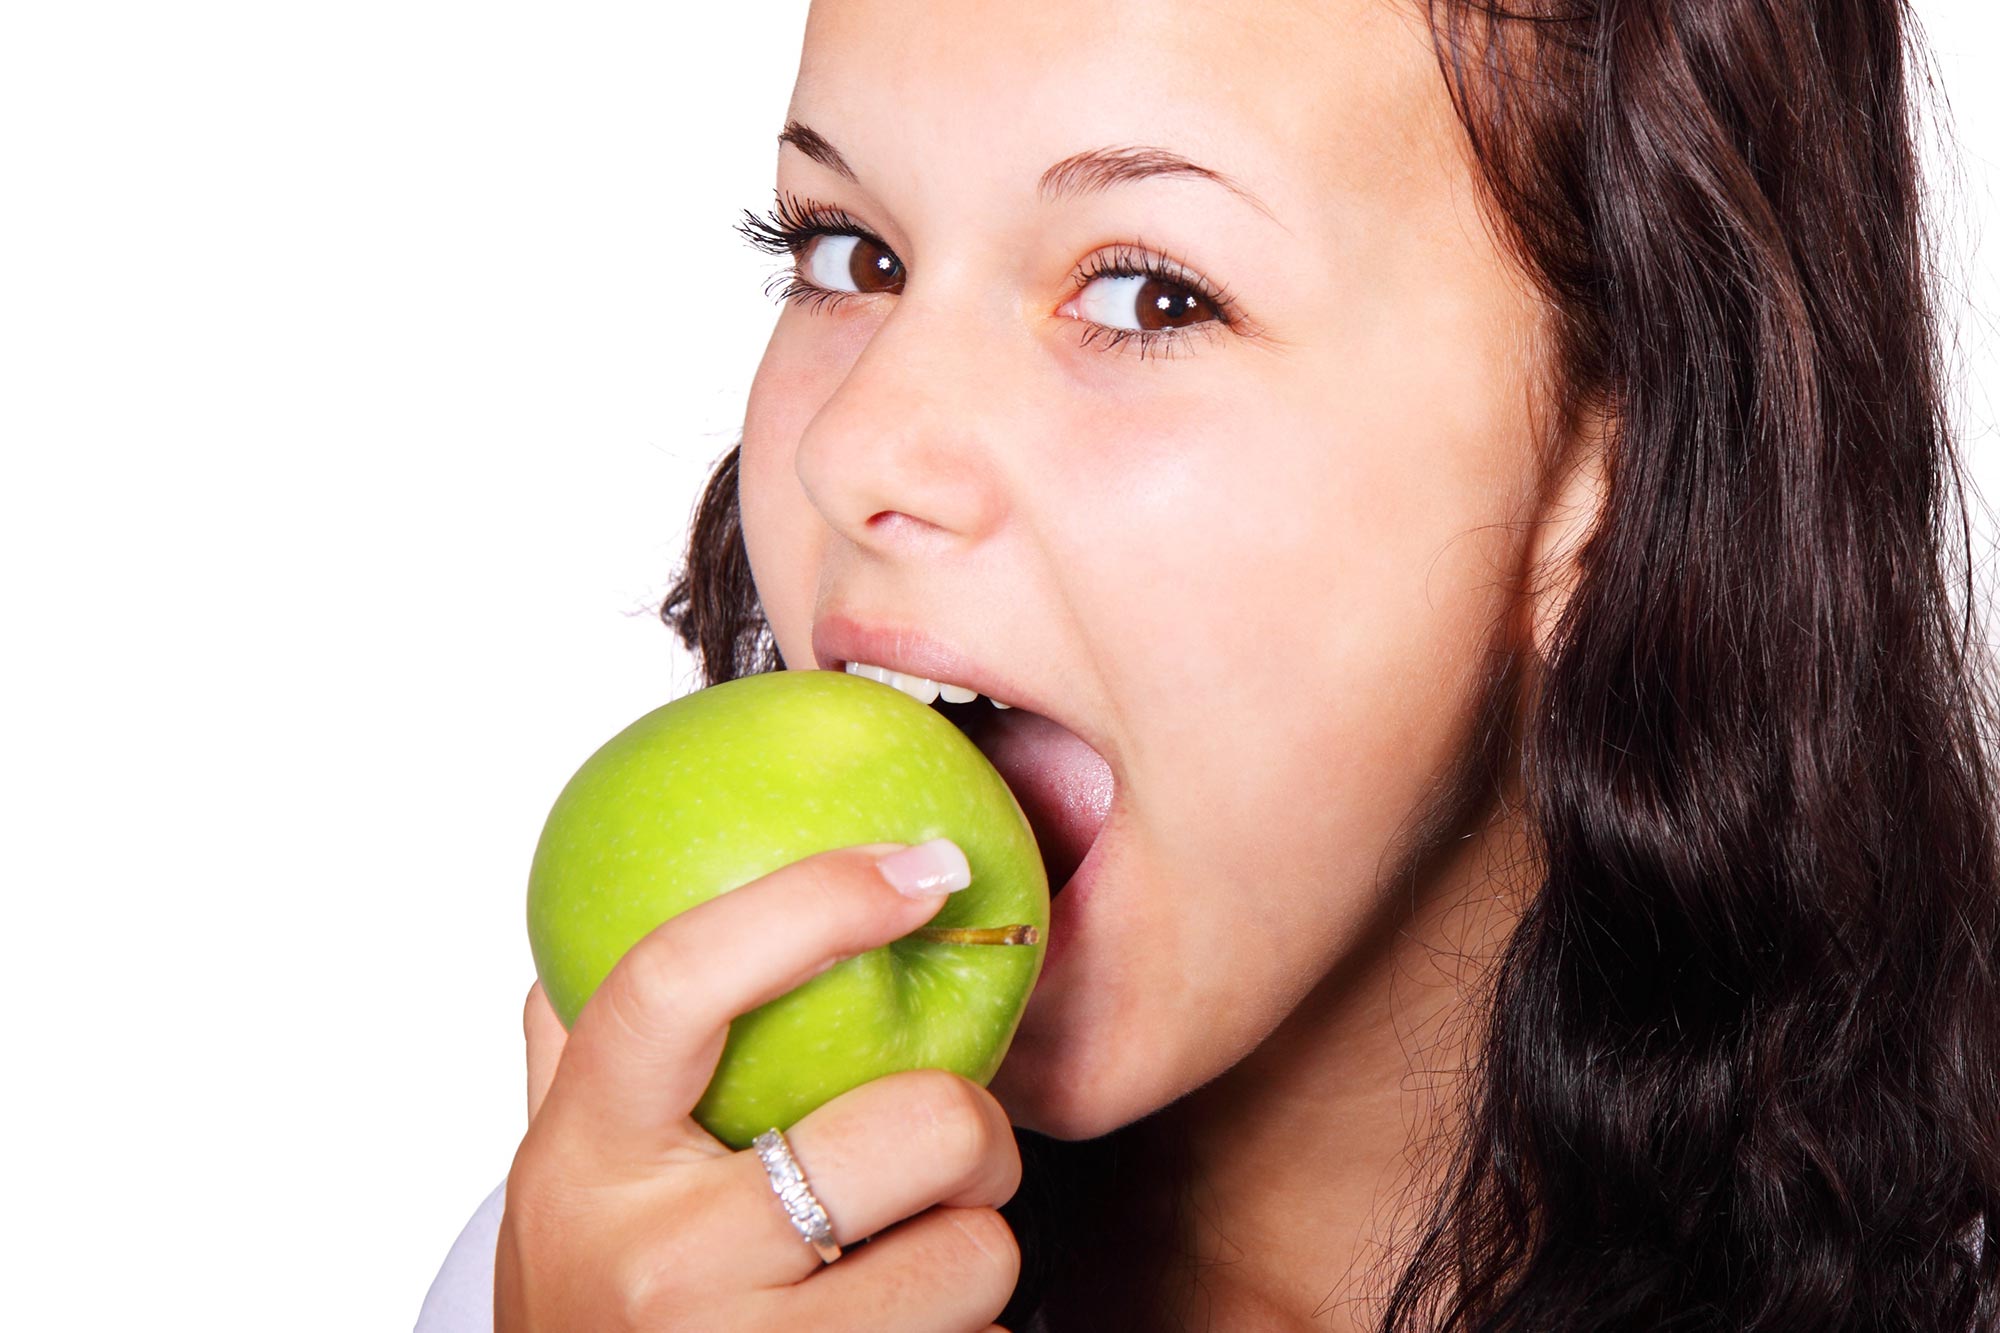 Apples May Boost Brain Function, Stimulate the Production of New Brain Cells